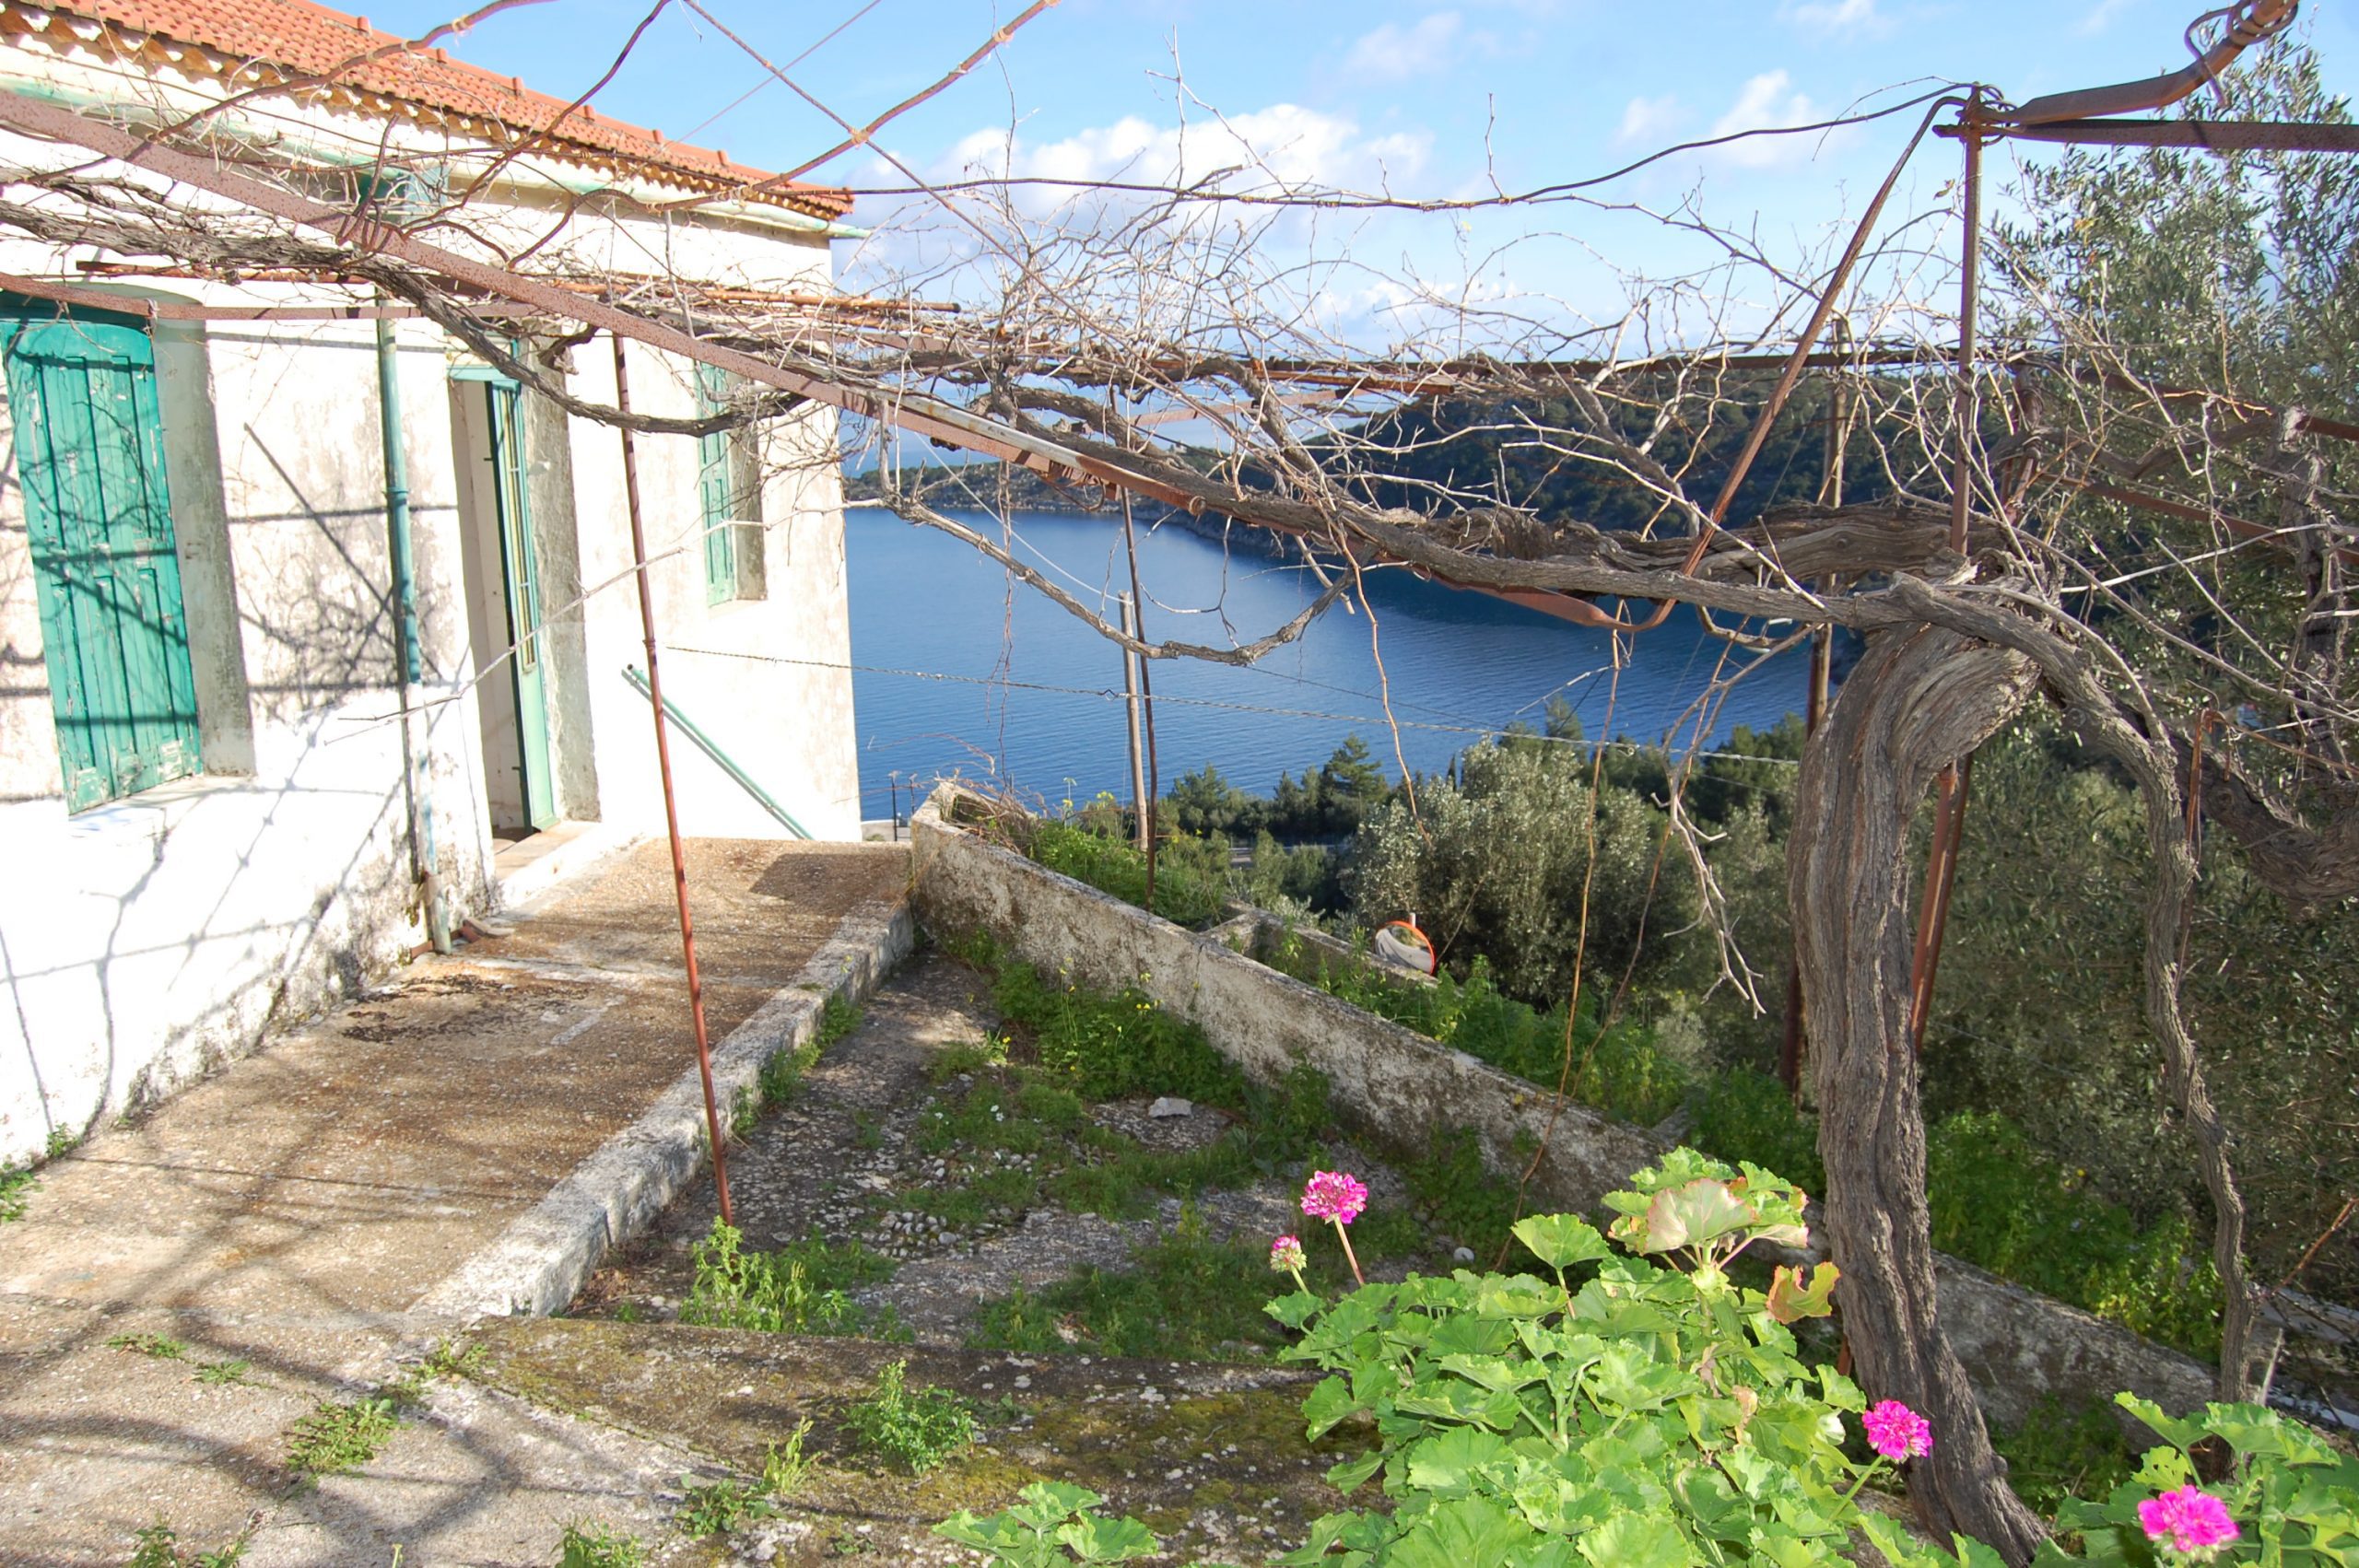 House for sale in Ithaca Greece with exterior views